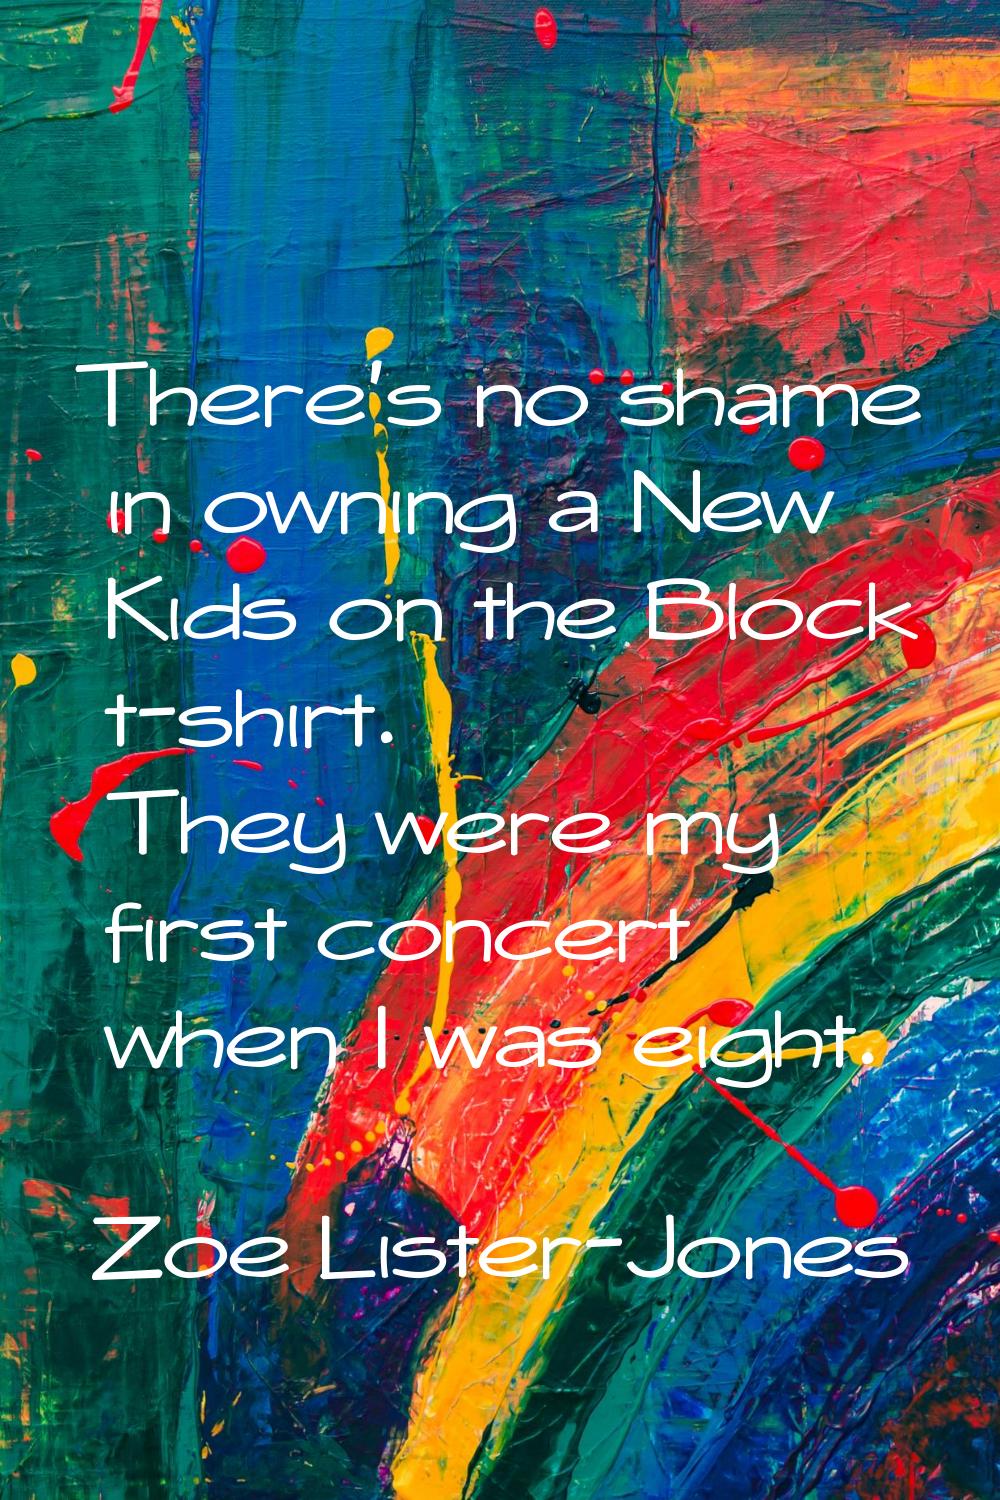 There's no shame in owning a New Kids on the Block t-shirt. They were my first concert when I was e